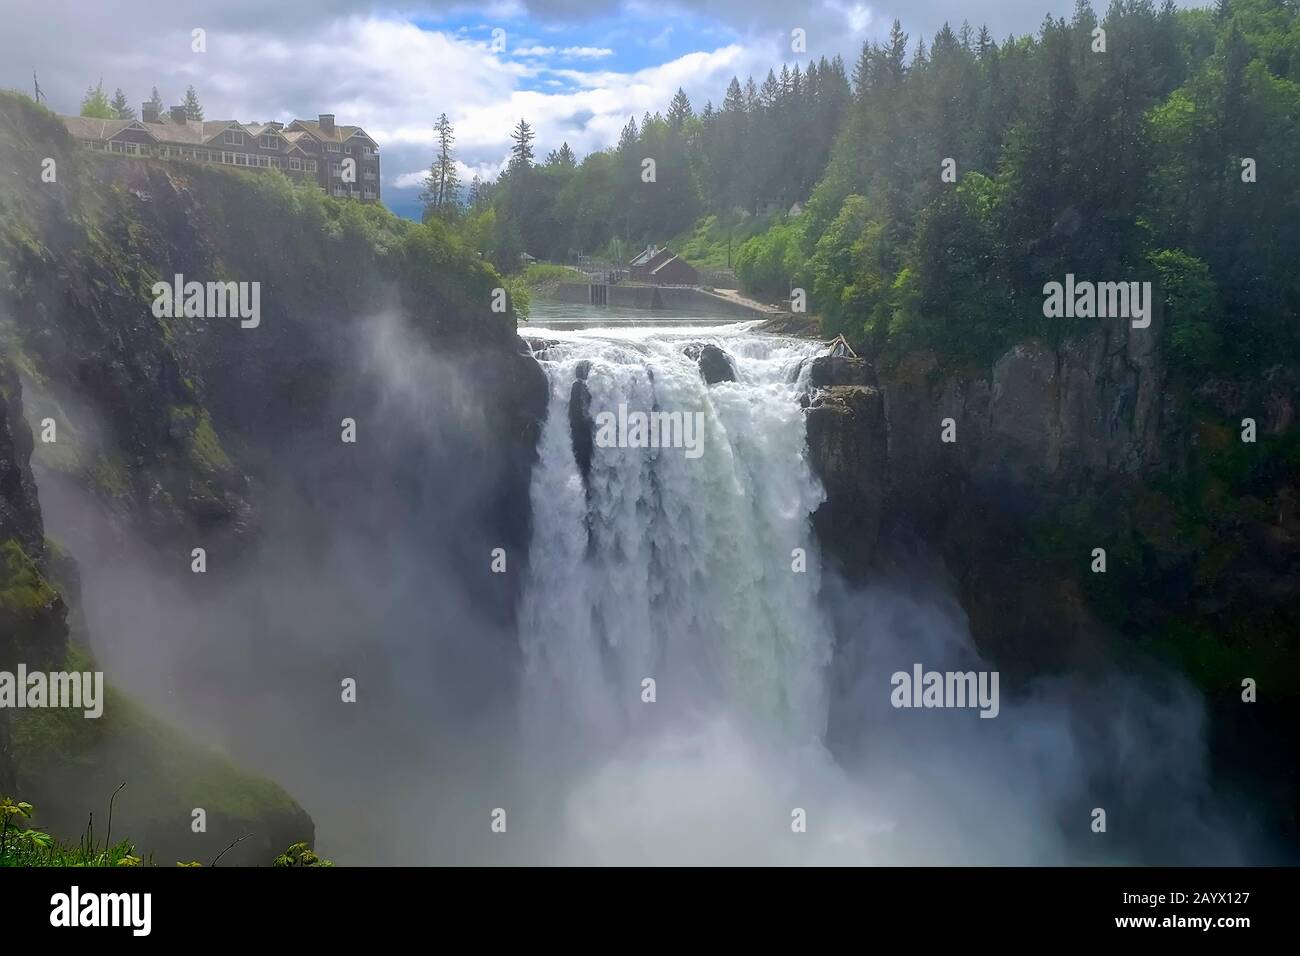 Snoqualmie Falls in the northwest United States, located east of Seattle on the Snoqualmie River. Stock Photo